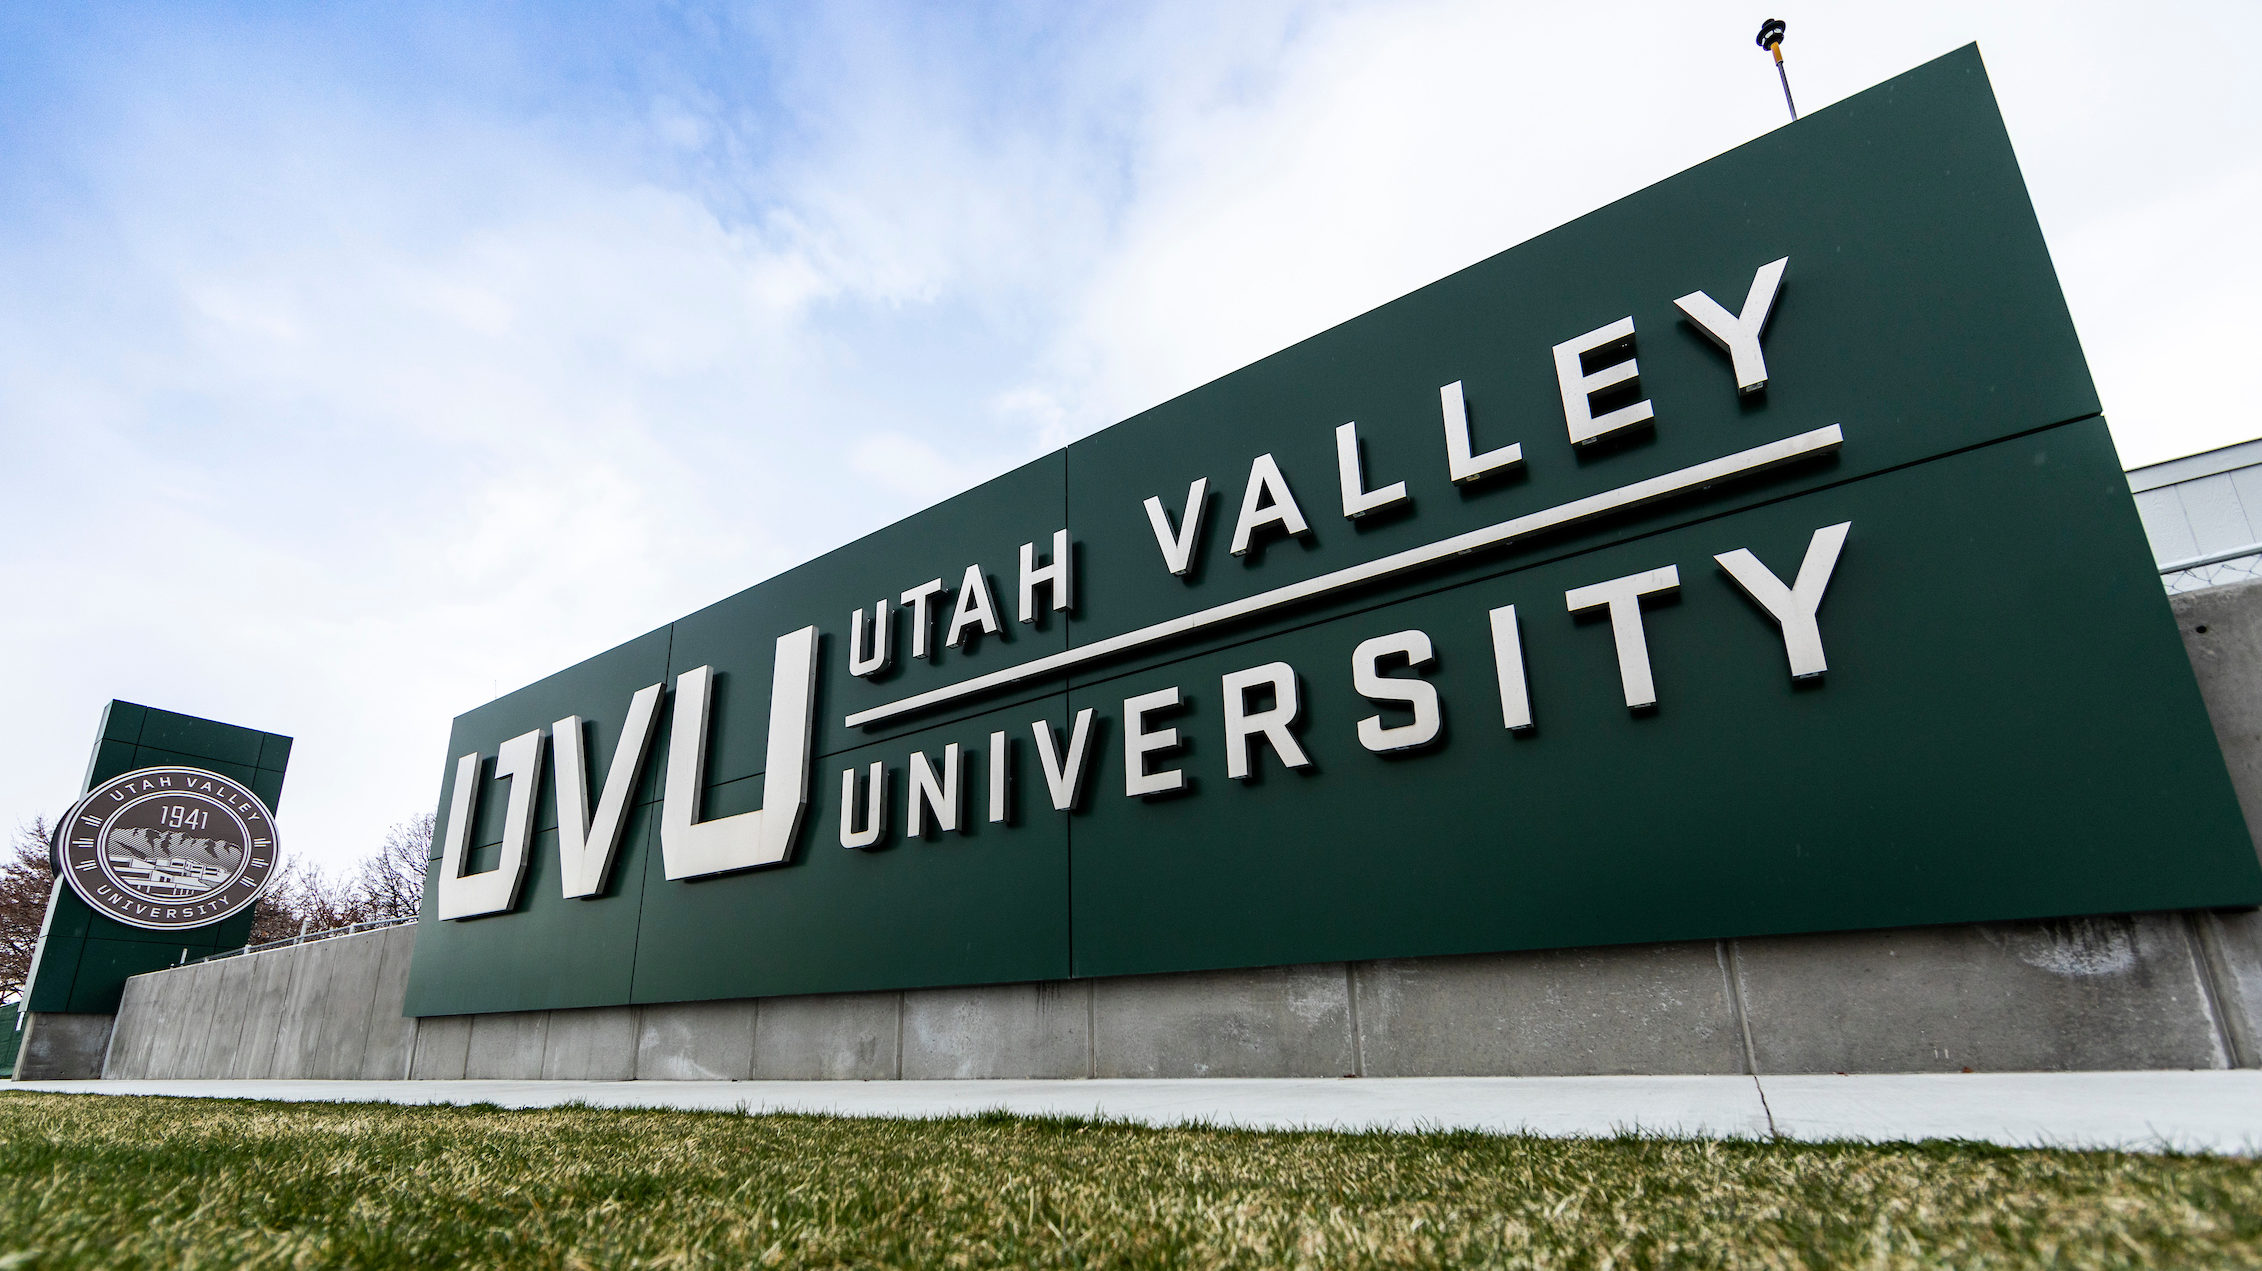 utah valley university sign pictured, the uvu wrestling team was shot at...